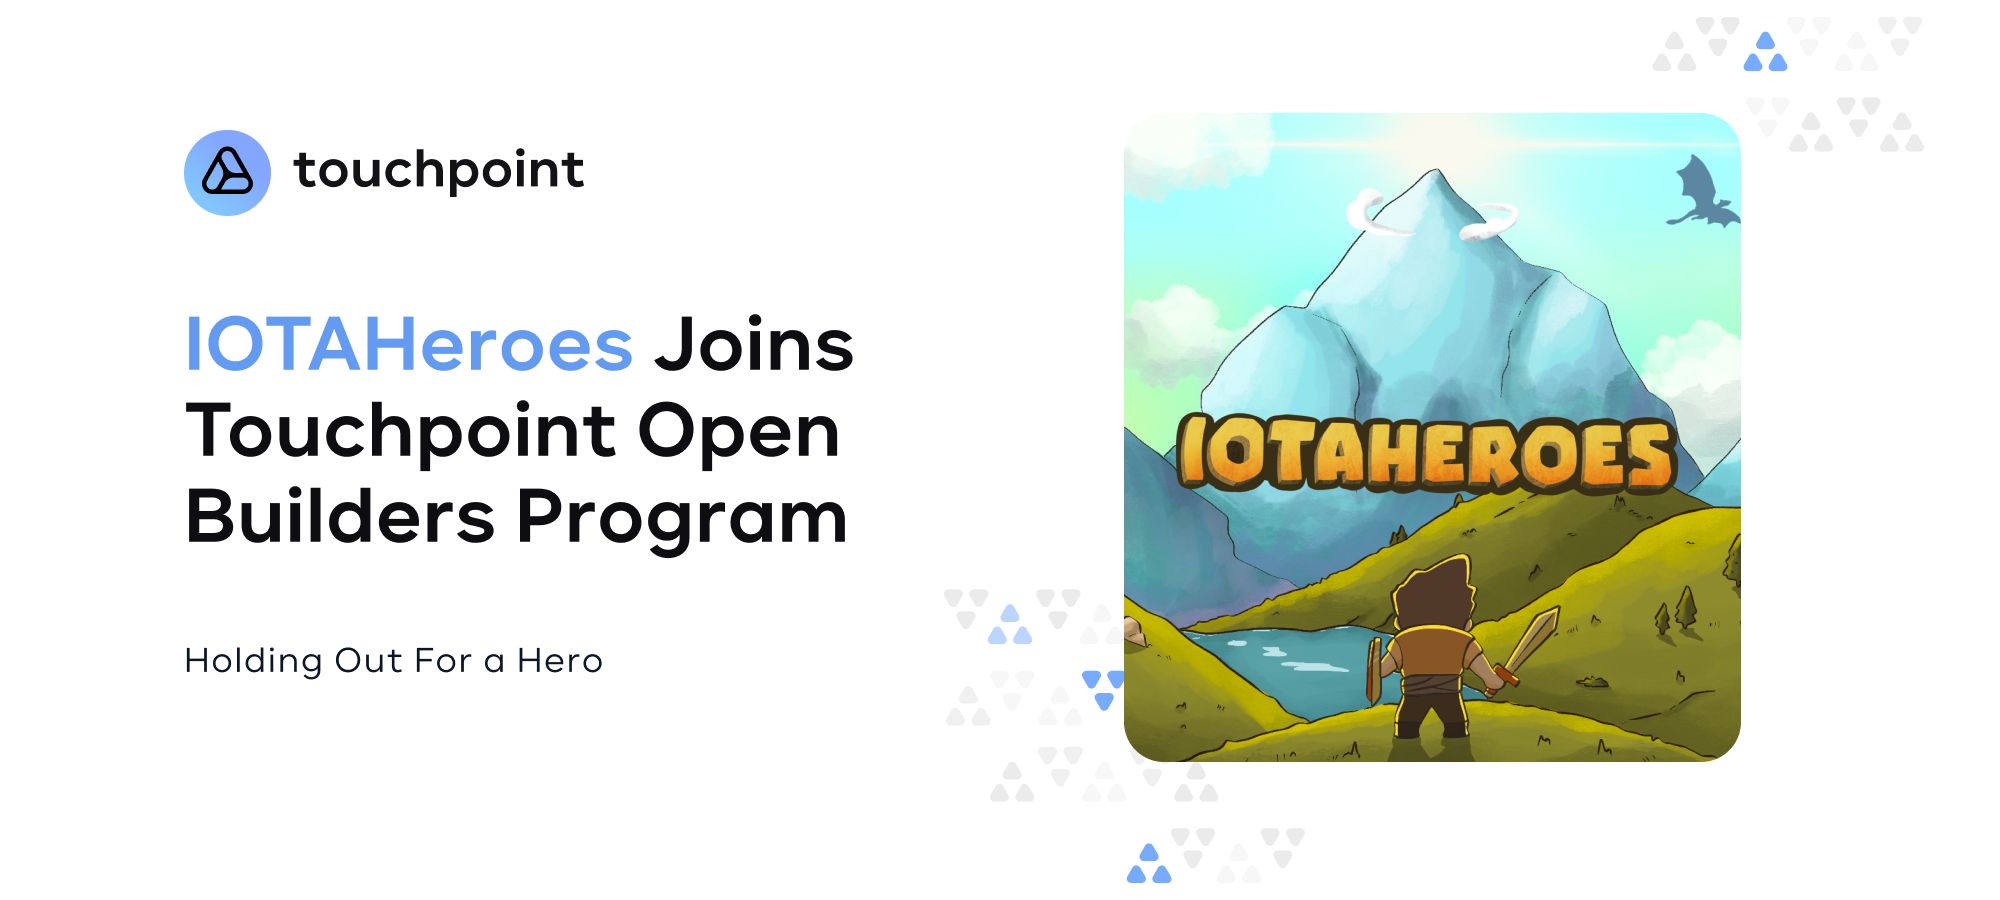 IOTAHeroes Joins the Touchpoint Open Builders Program